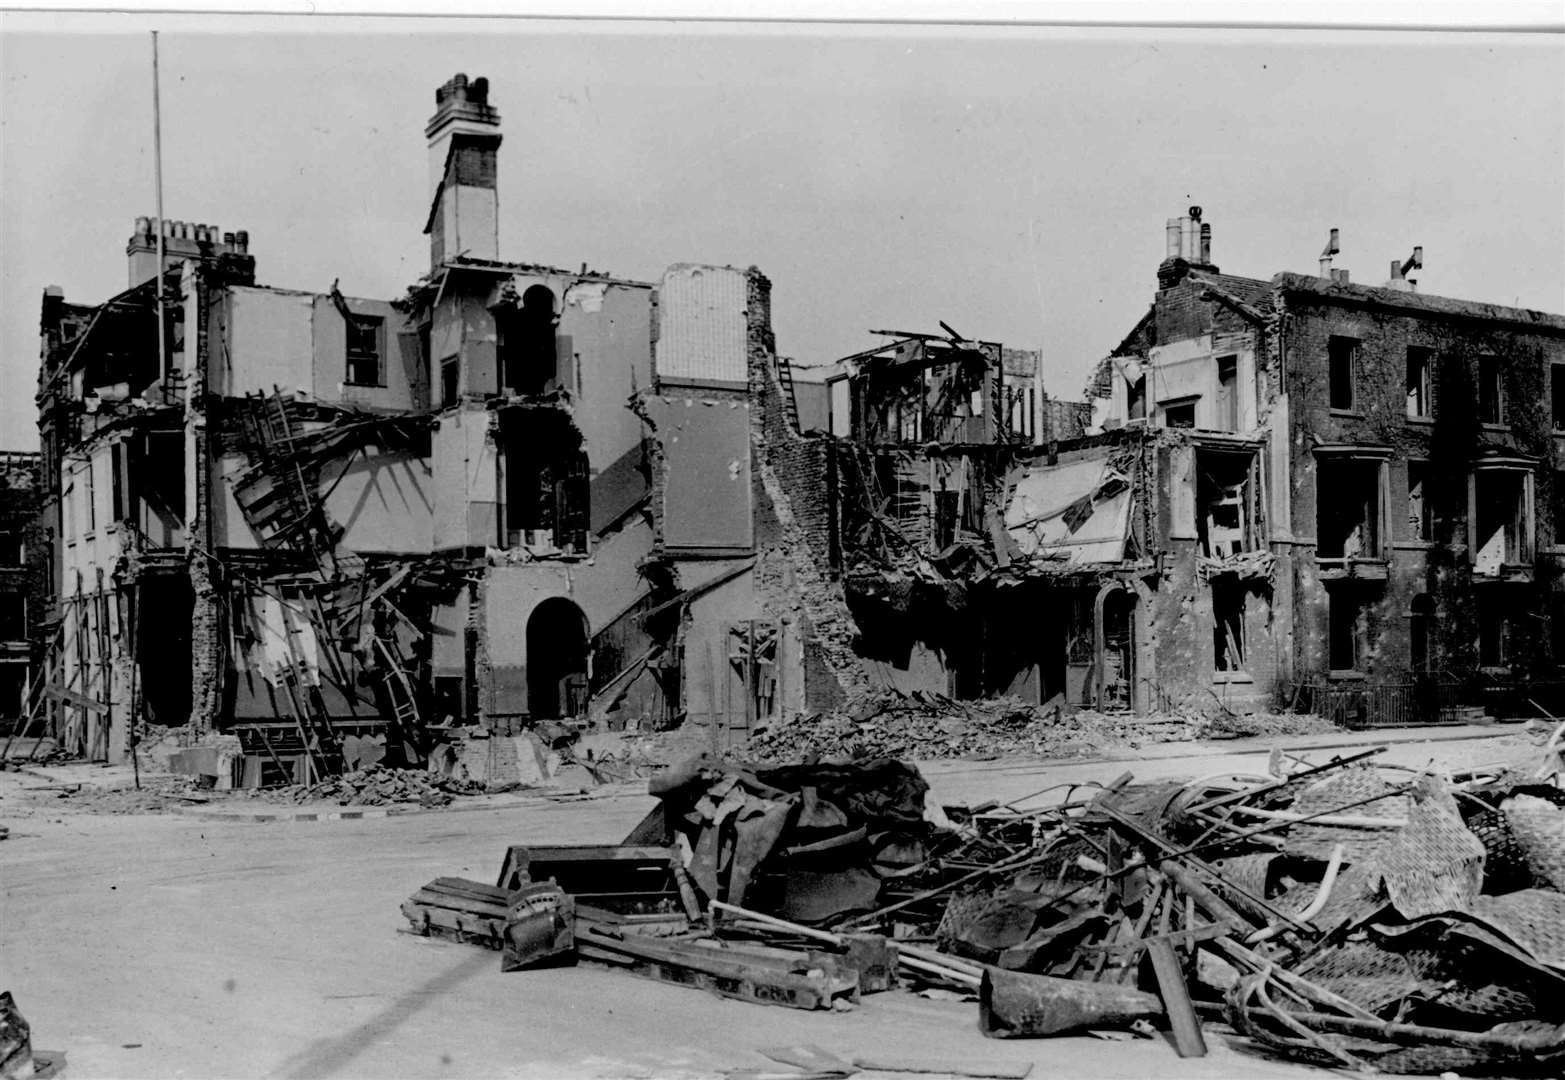 Dover became known as Hellfire Corner after relentless bombing in 1940